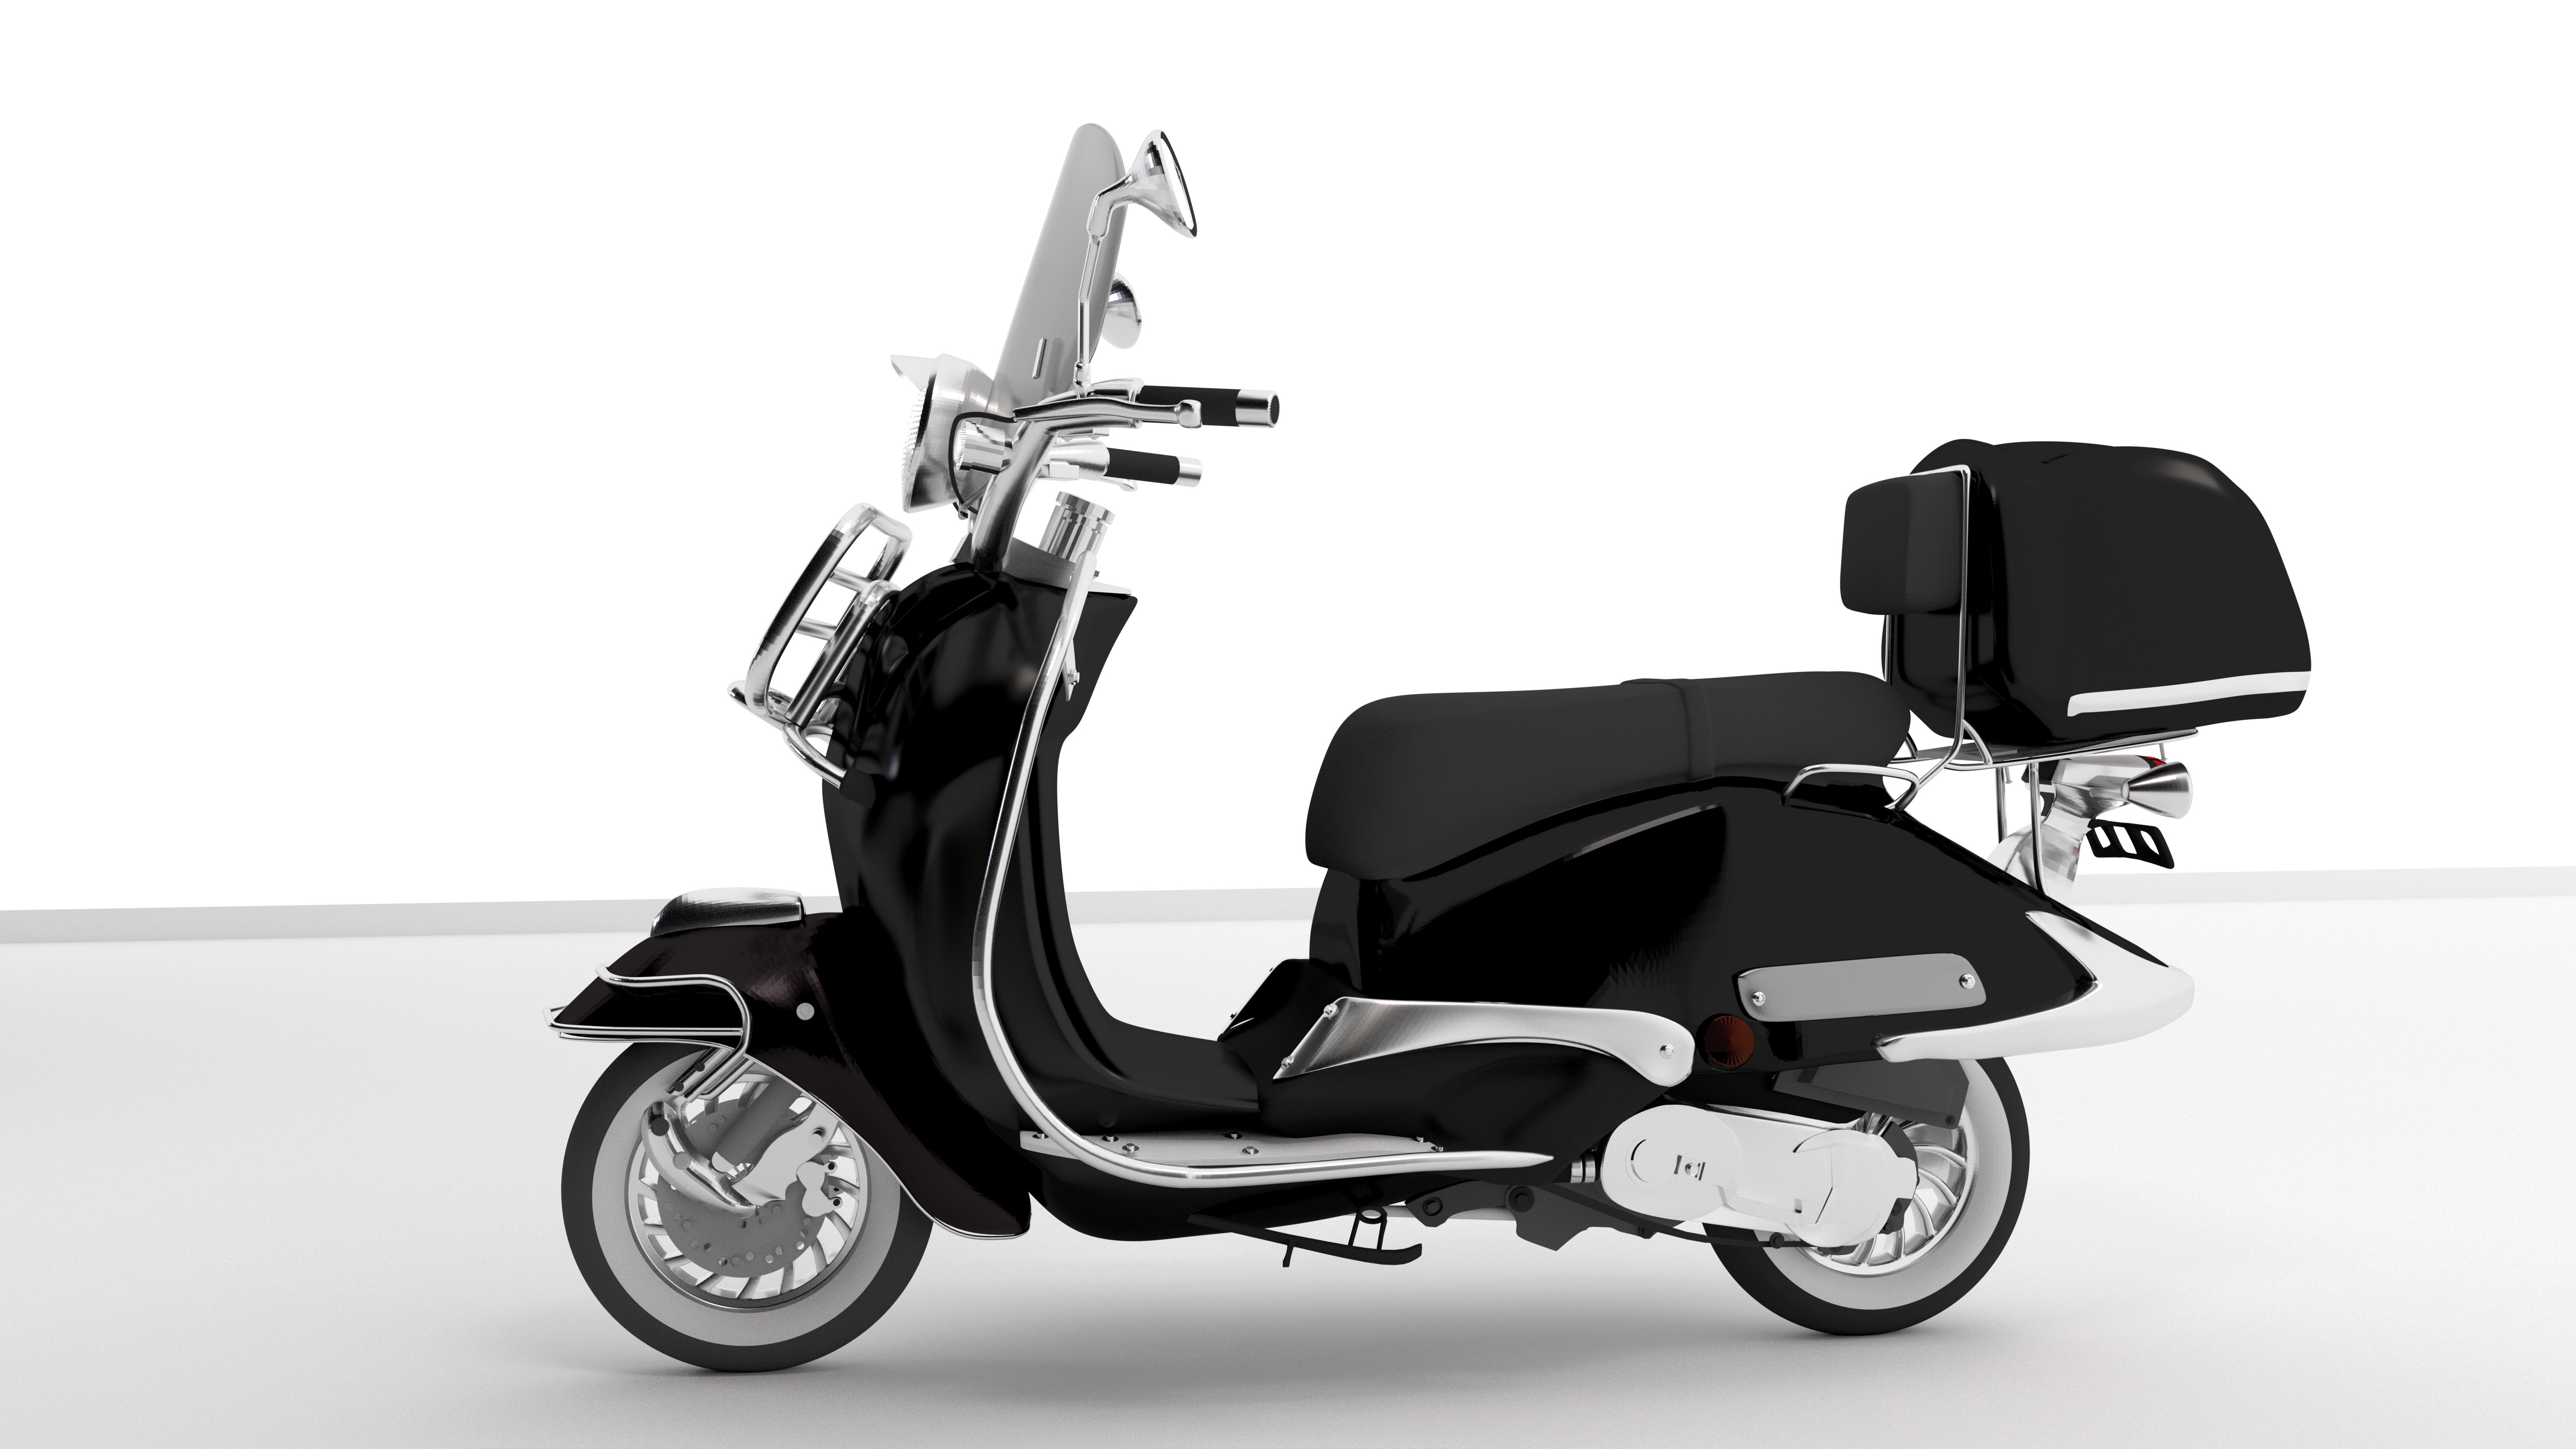 moped preview image 2